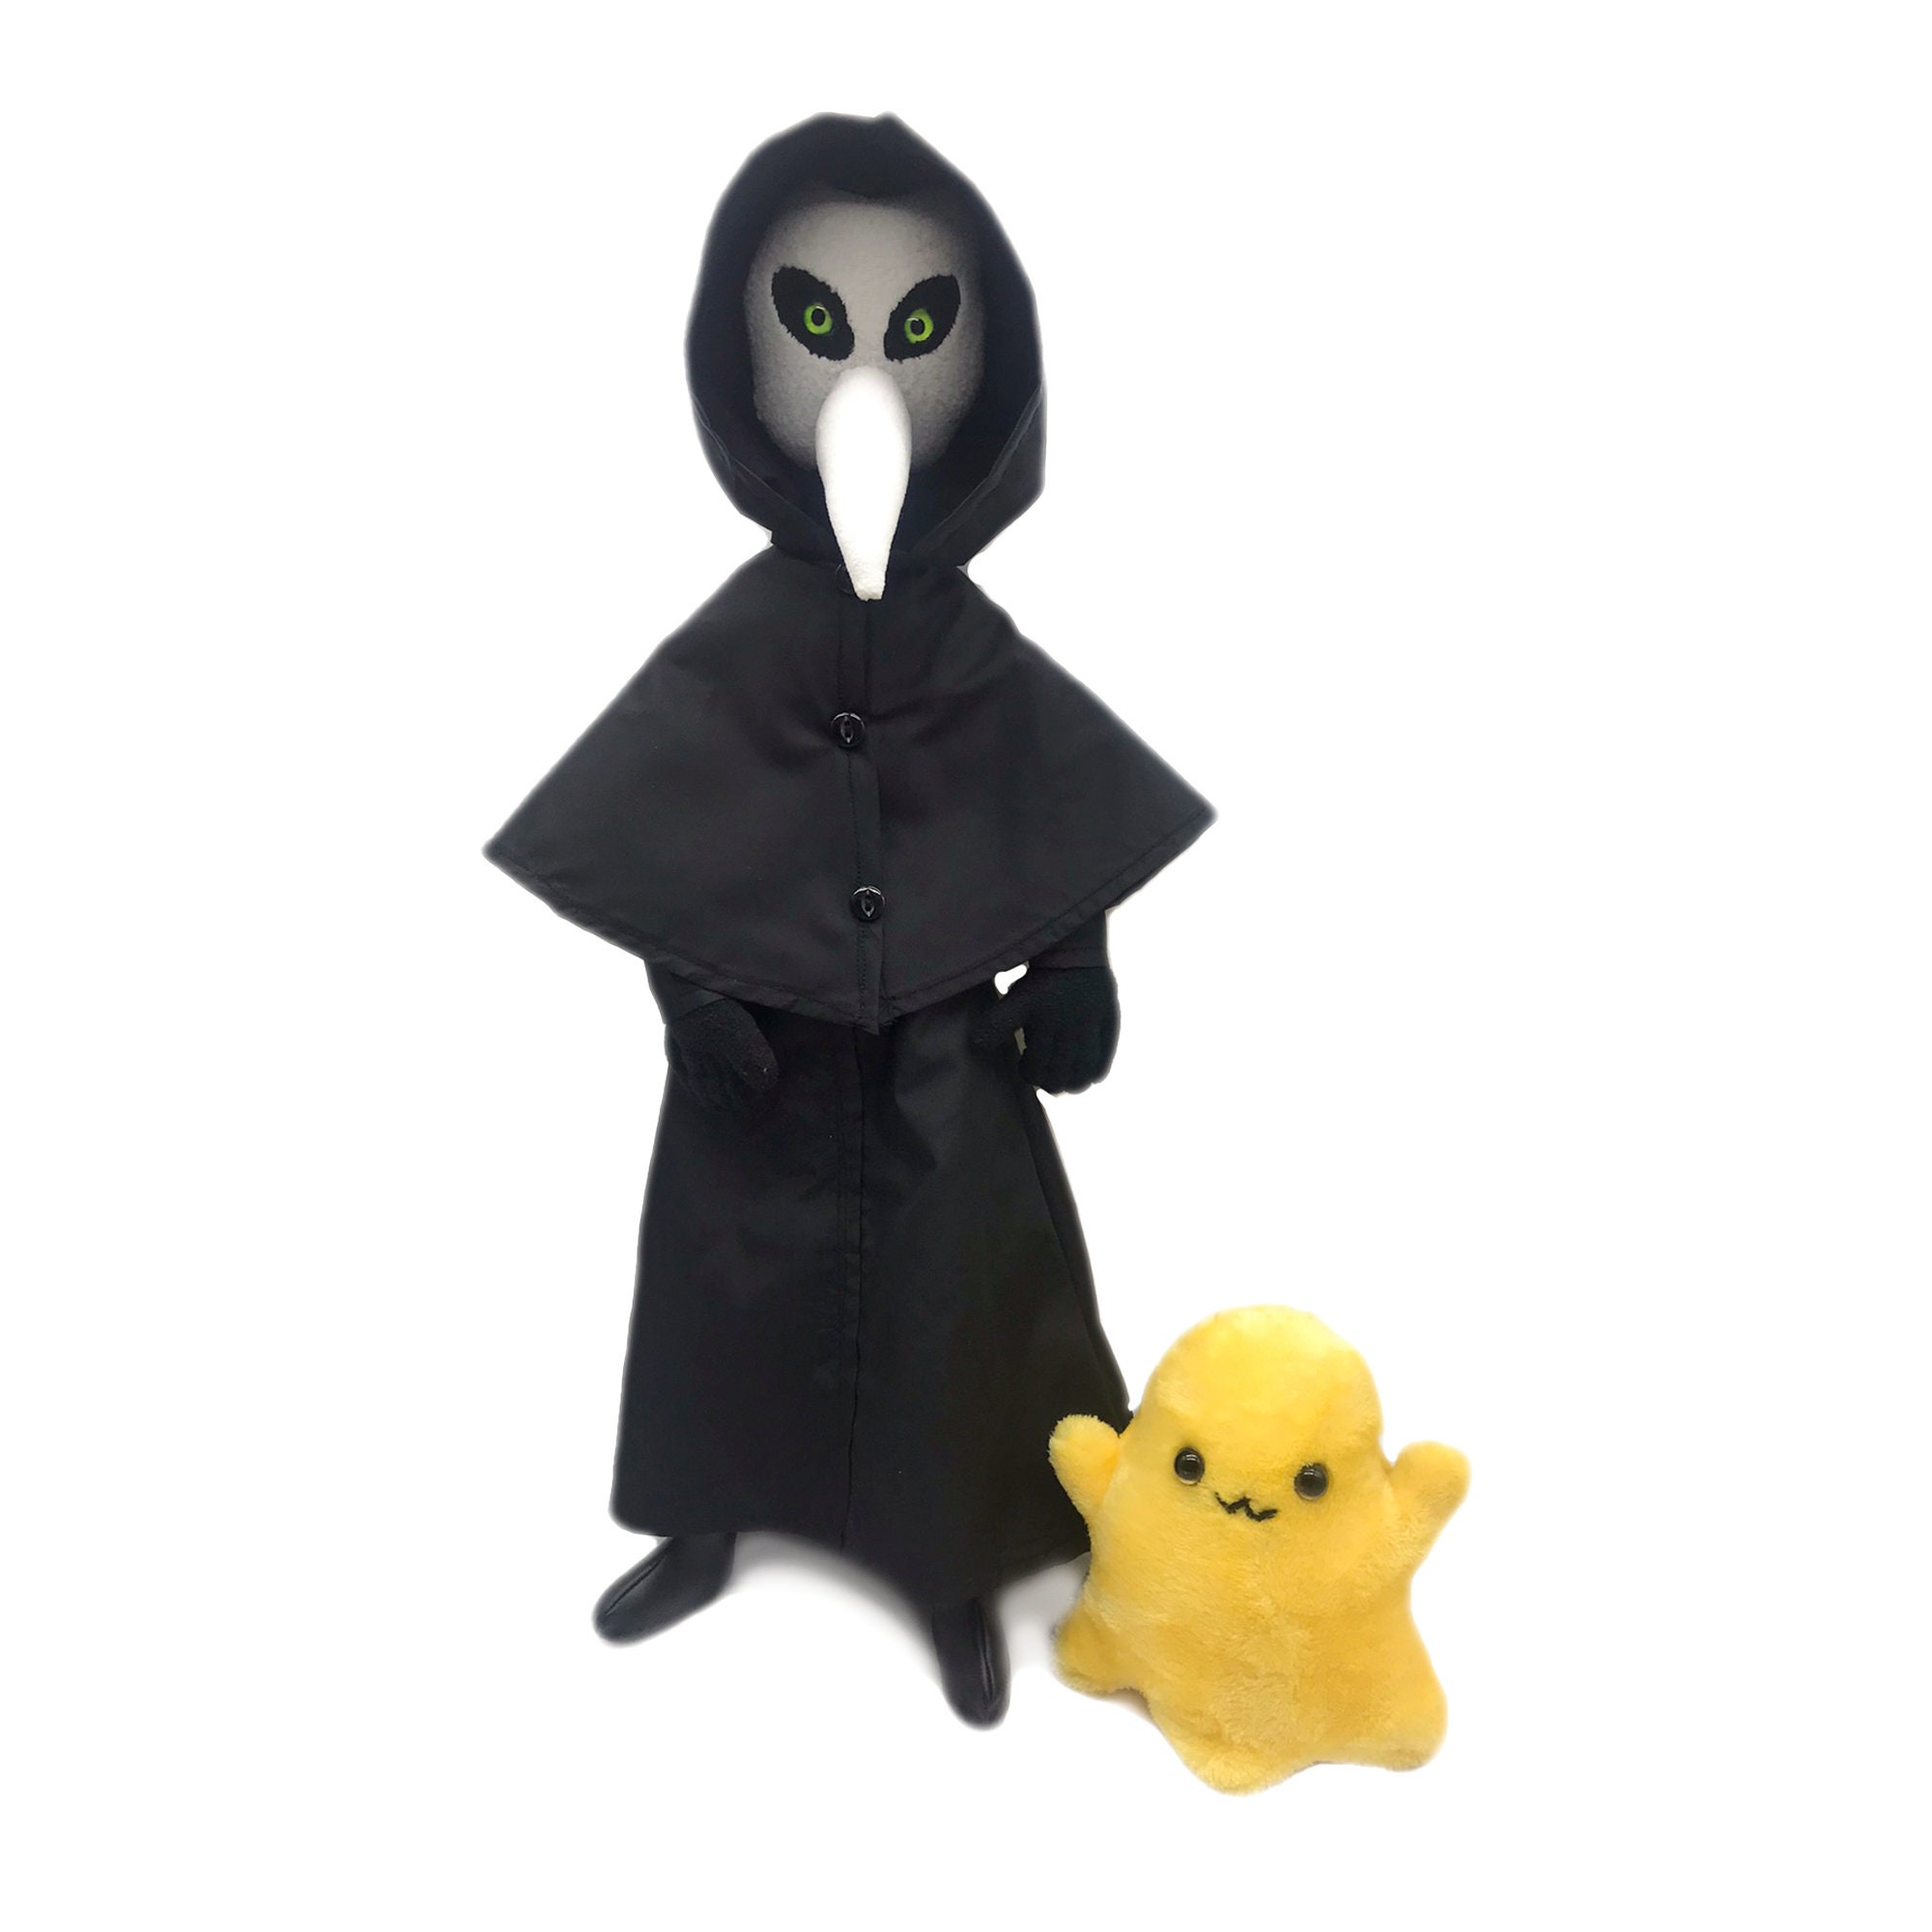  FIMIGID SCP Plush Toys, SCP 999 Plush, Tickle Monster Halloween  Stuffed Plushie Toy Gift for Kids (Candy Tickle Monster) : Toys & Games